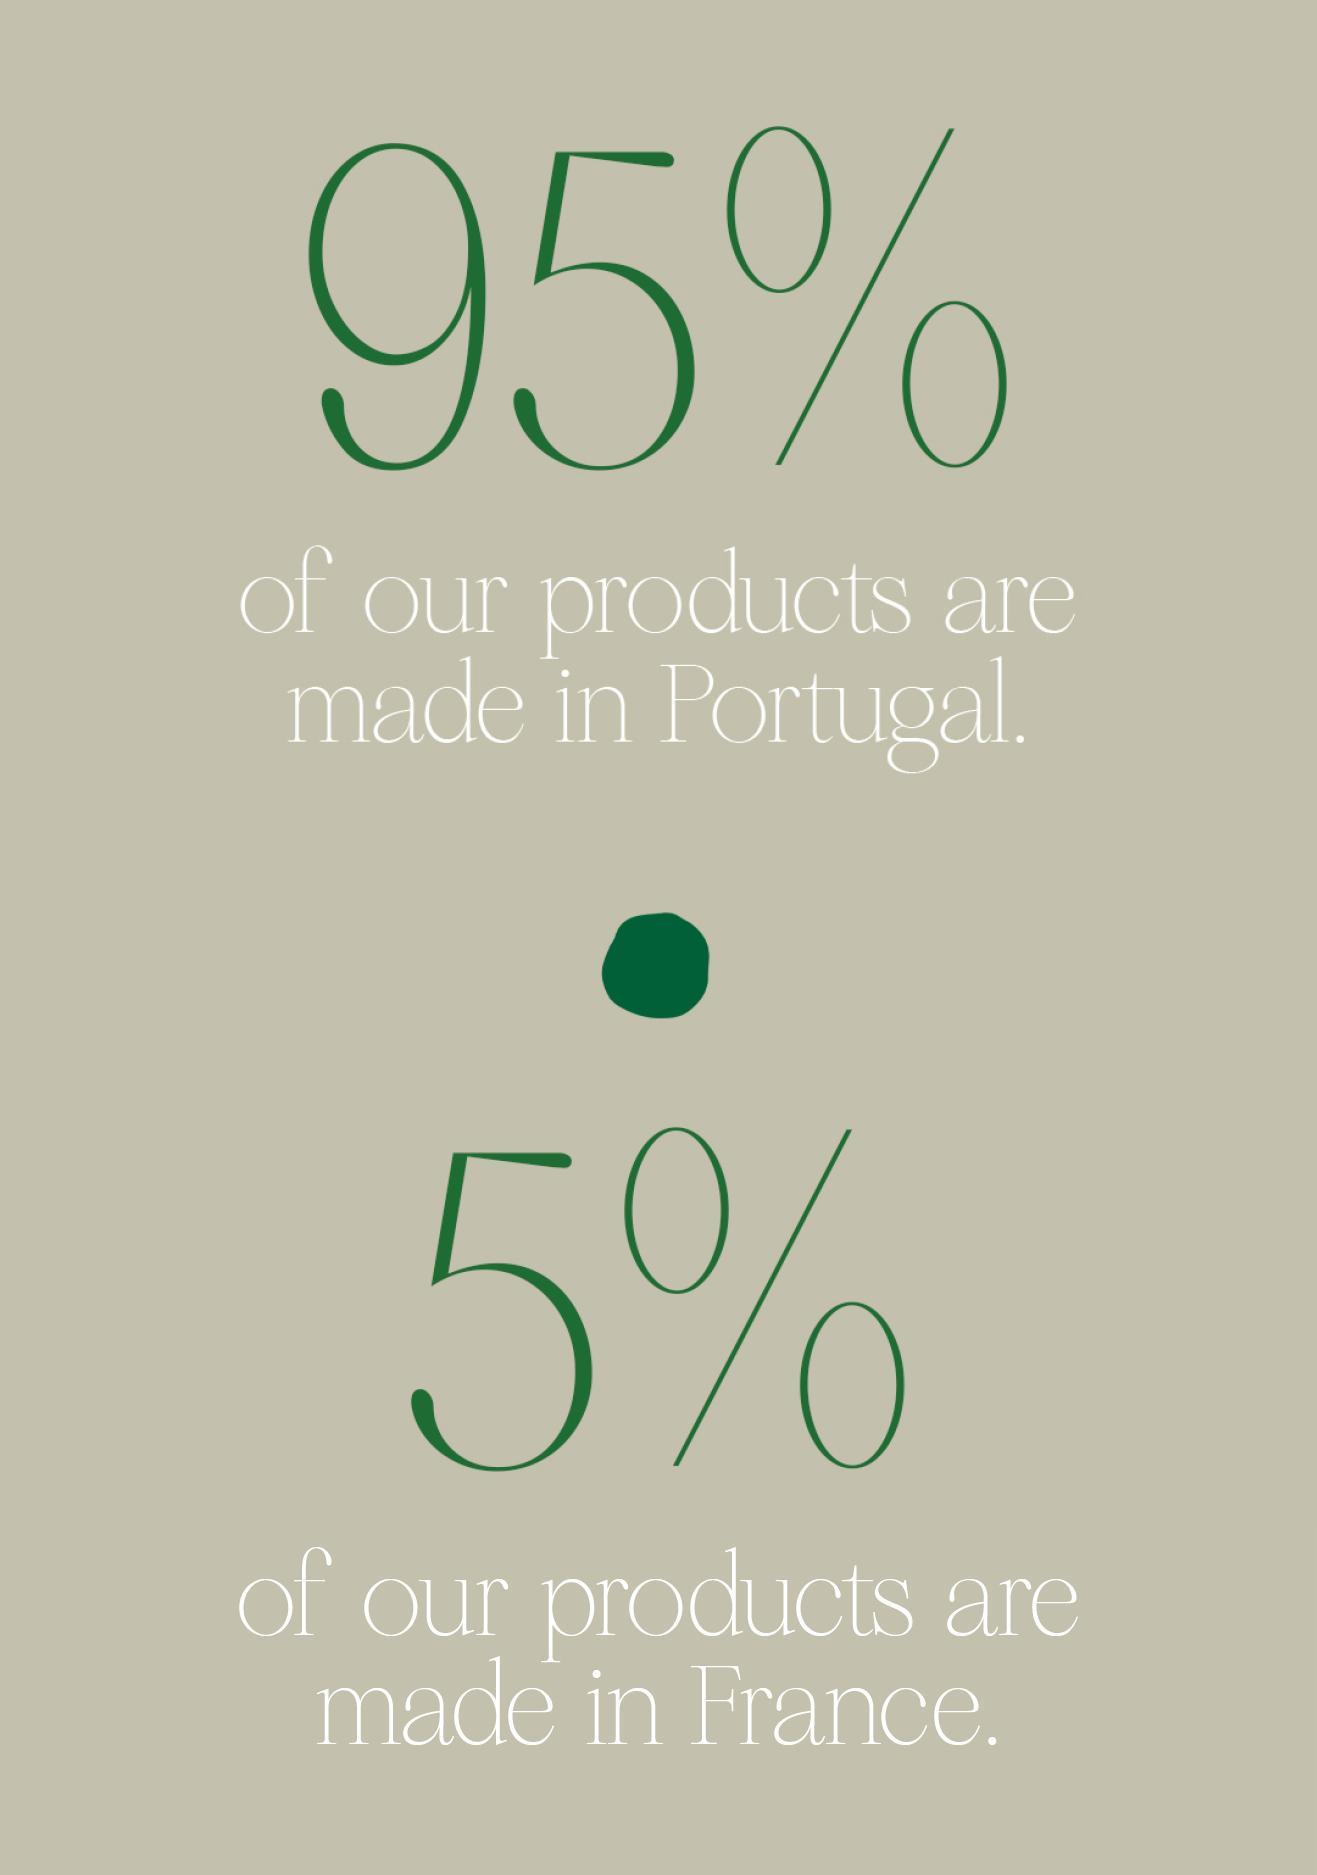 Made in Portugal and France